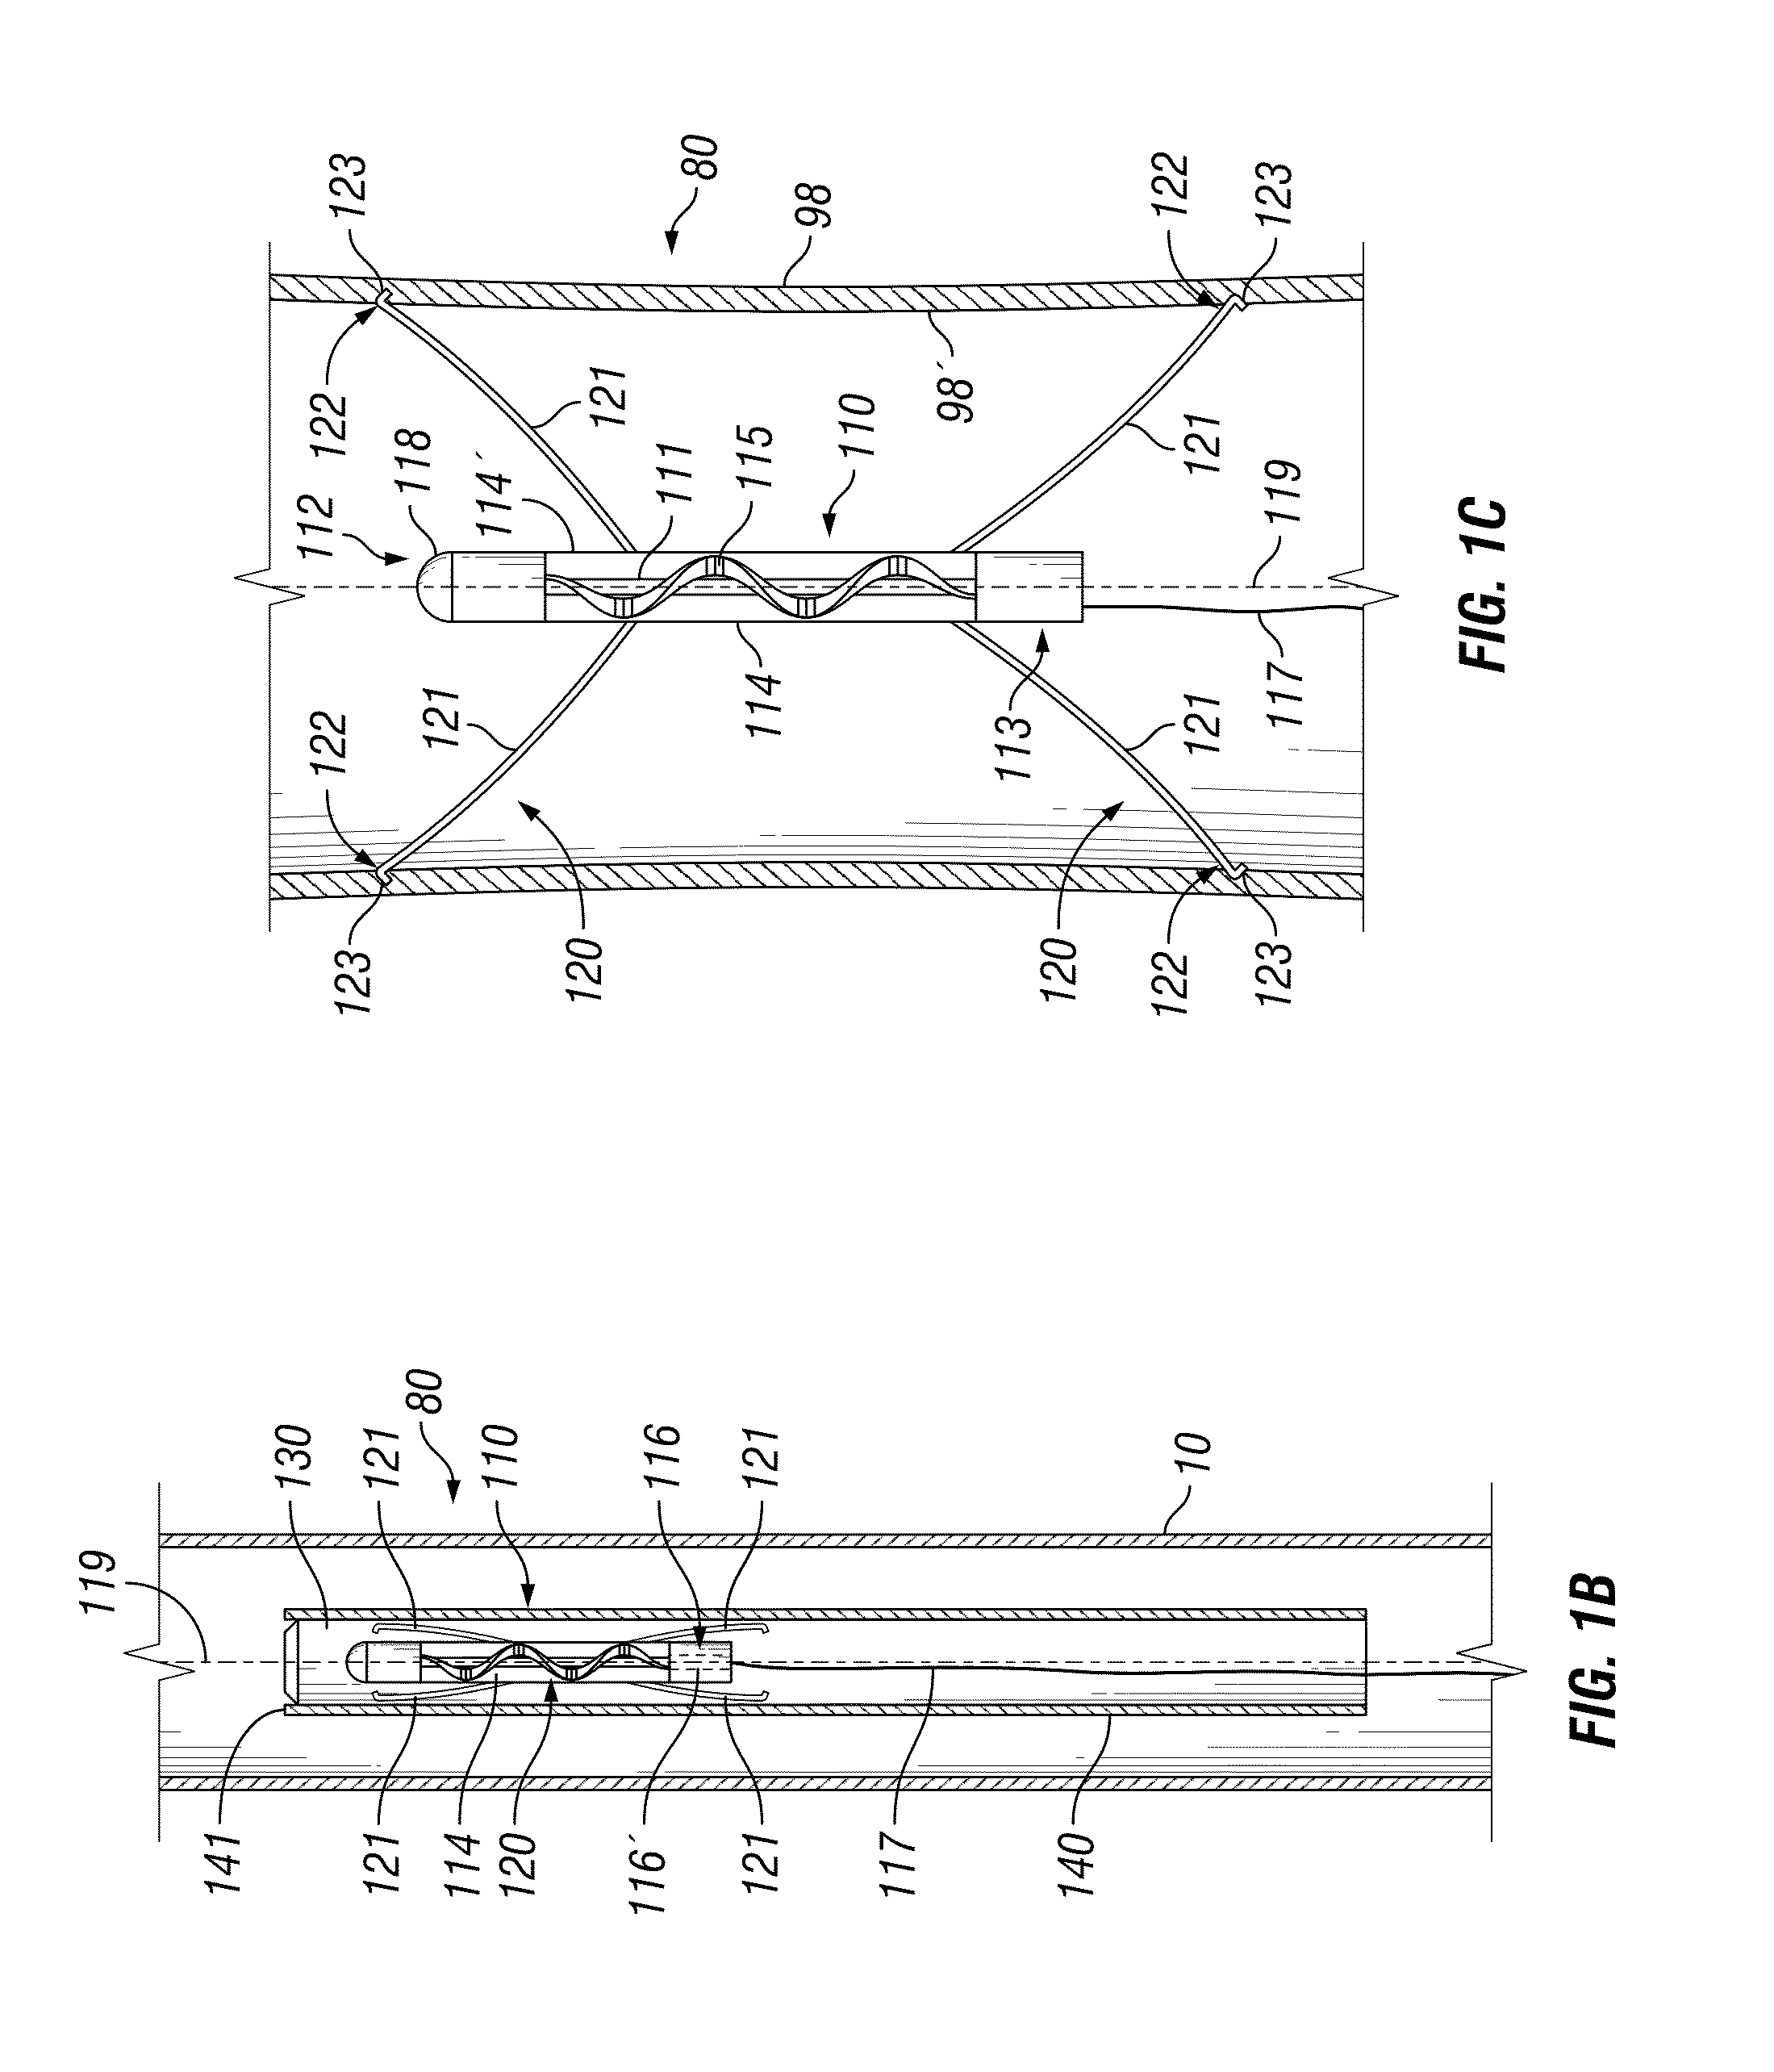 Systems and methods for fluid flows and/or pressures for circulation and perfusion enhancement